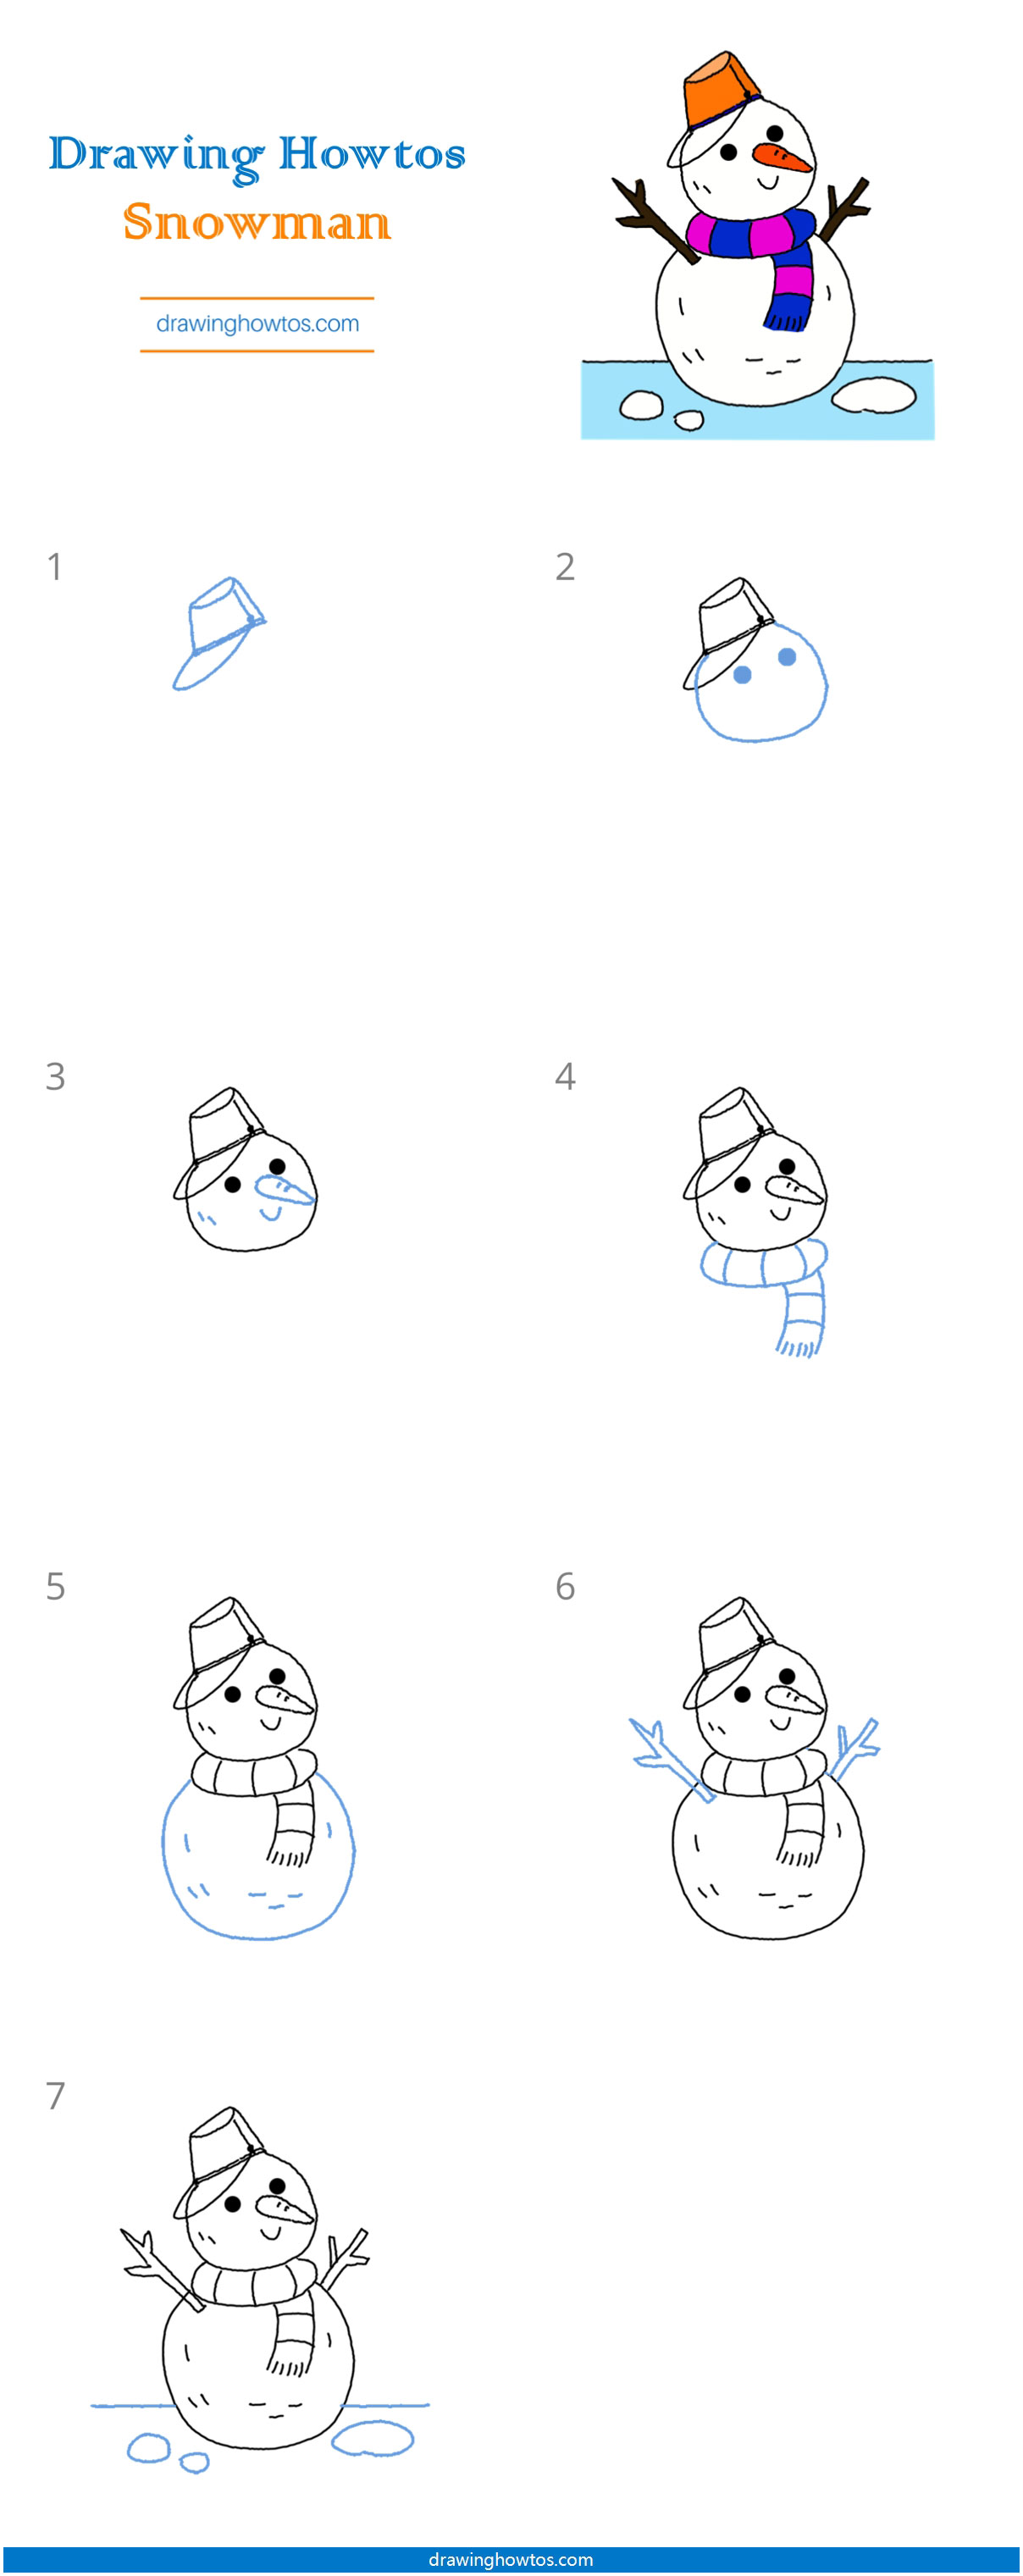 How to Draw a Snowman Cute Step by Step